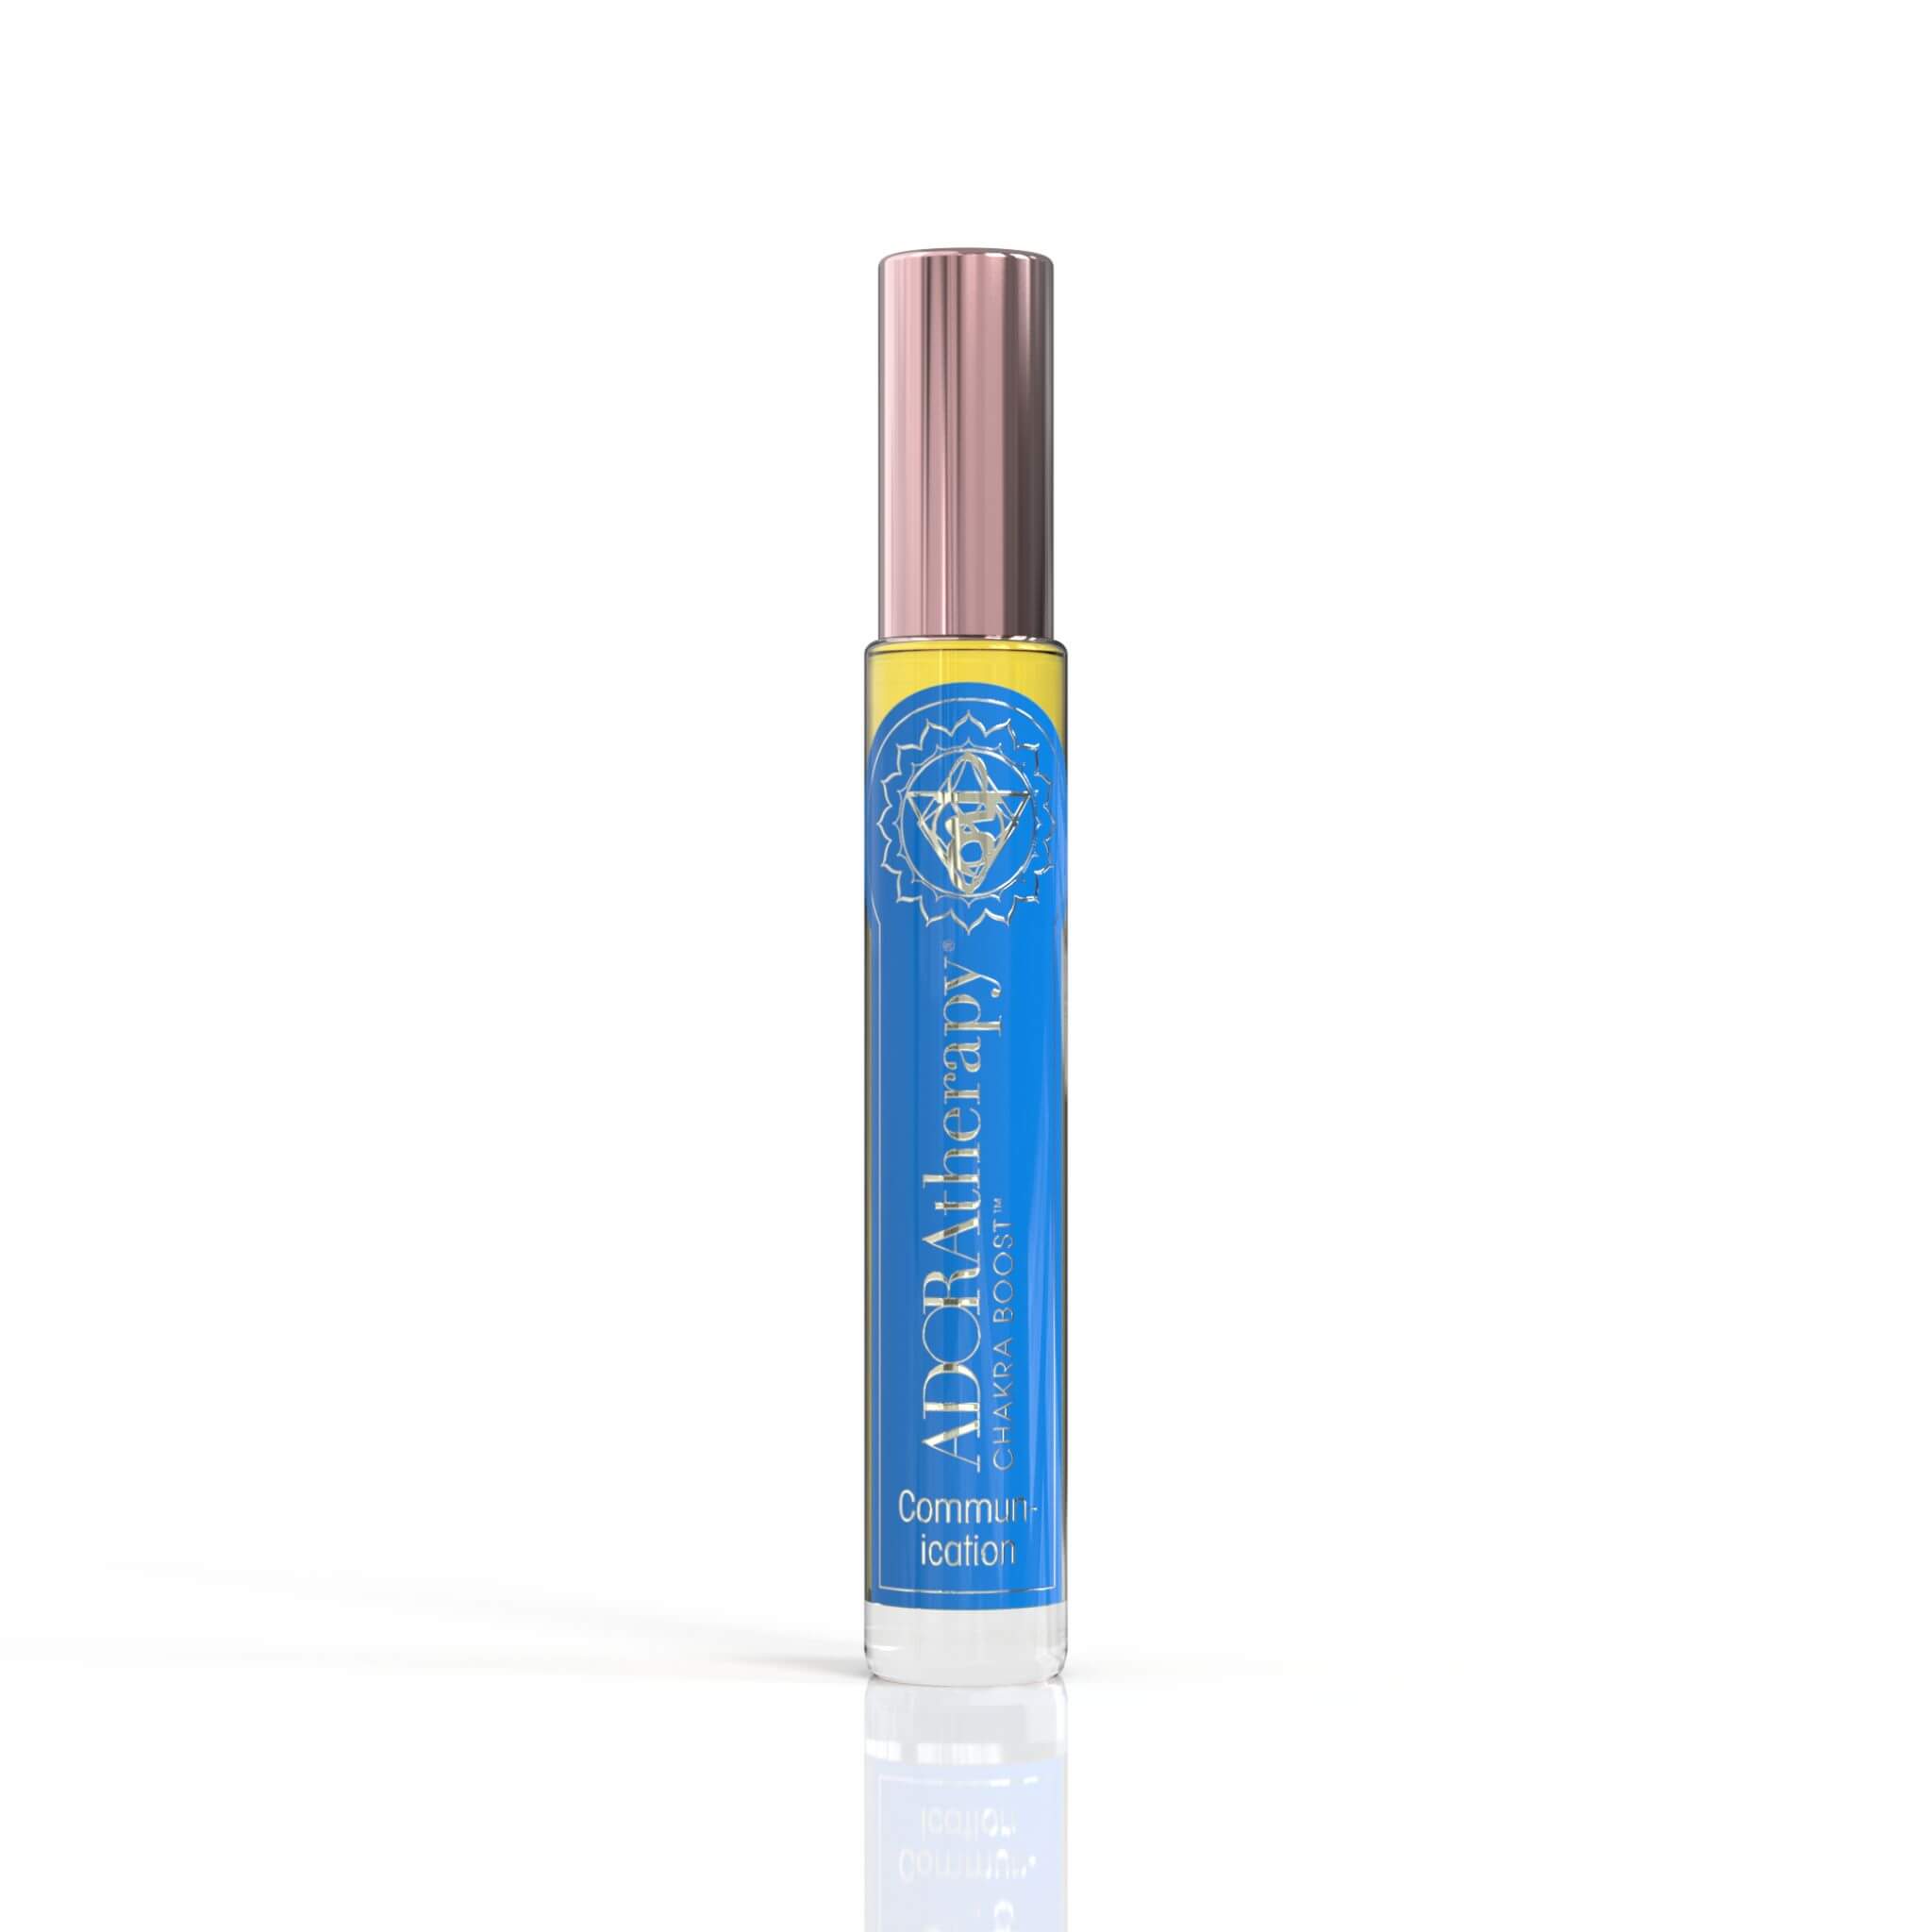 Chakra 5 Communication Roll On Perfume Oil by Adoratherapy.com